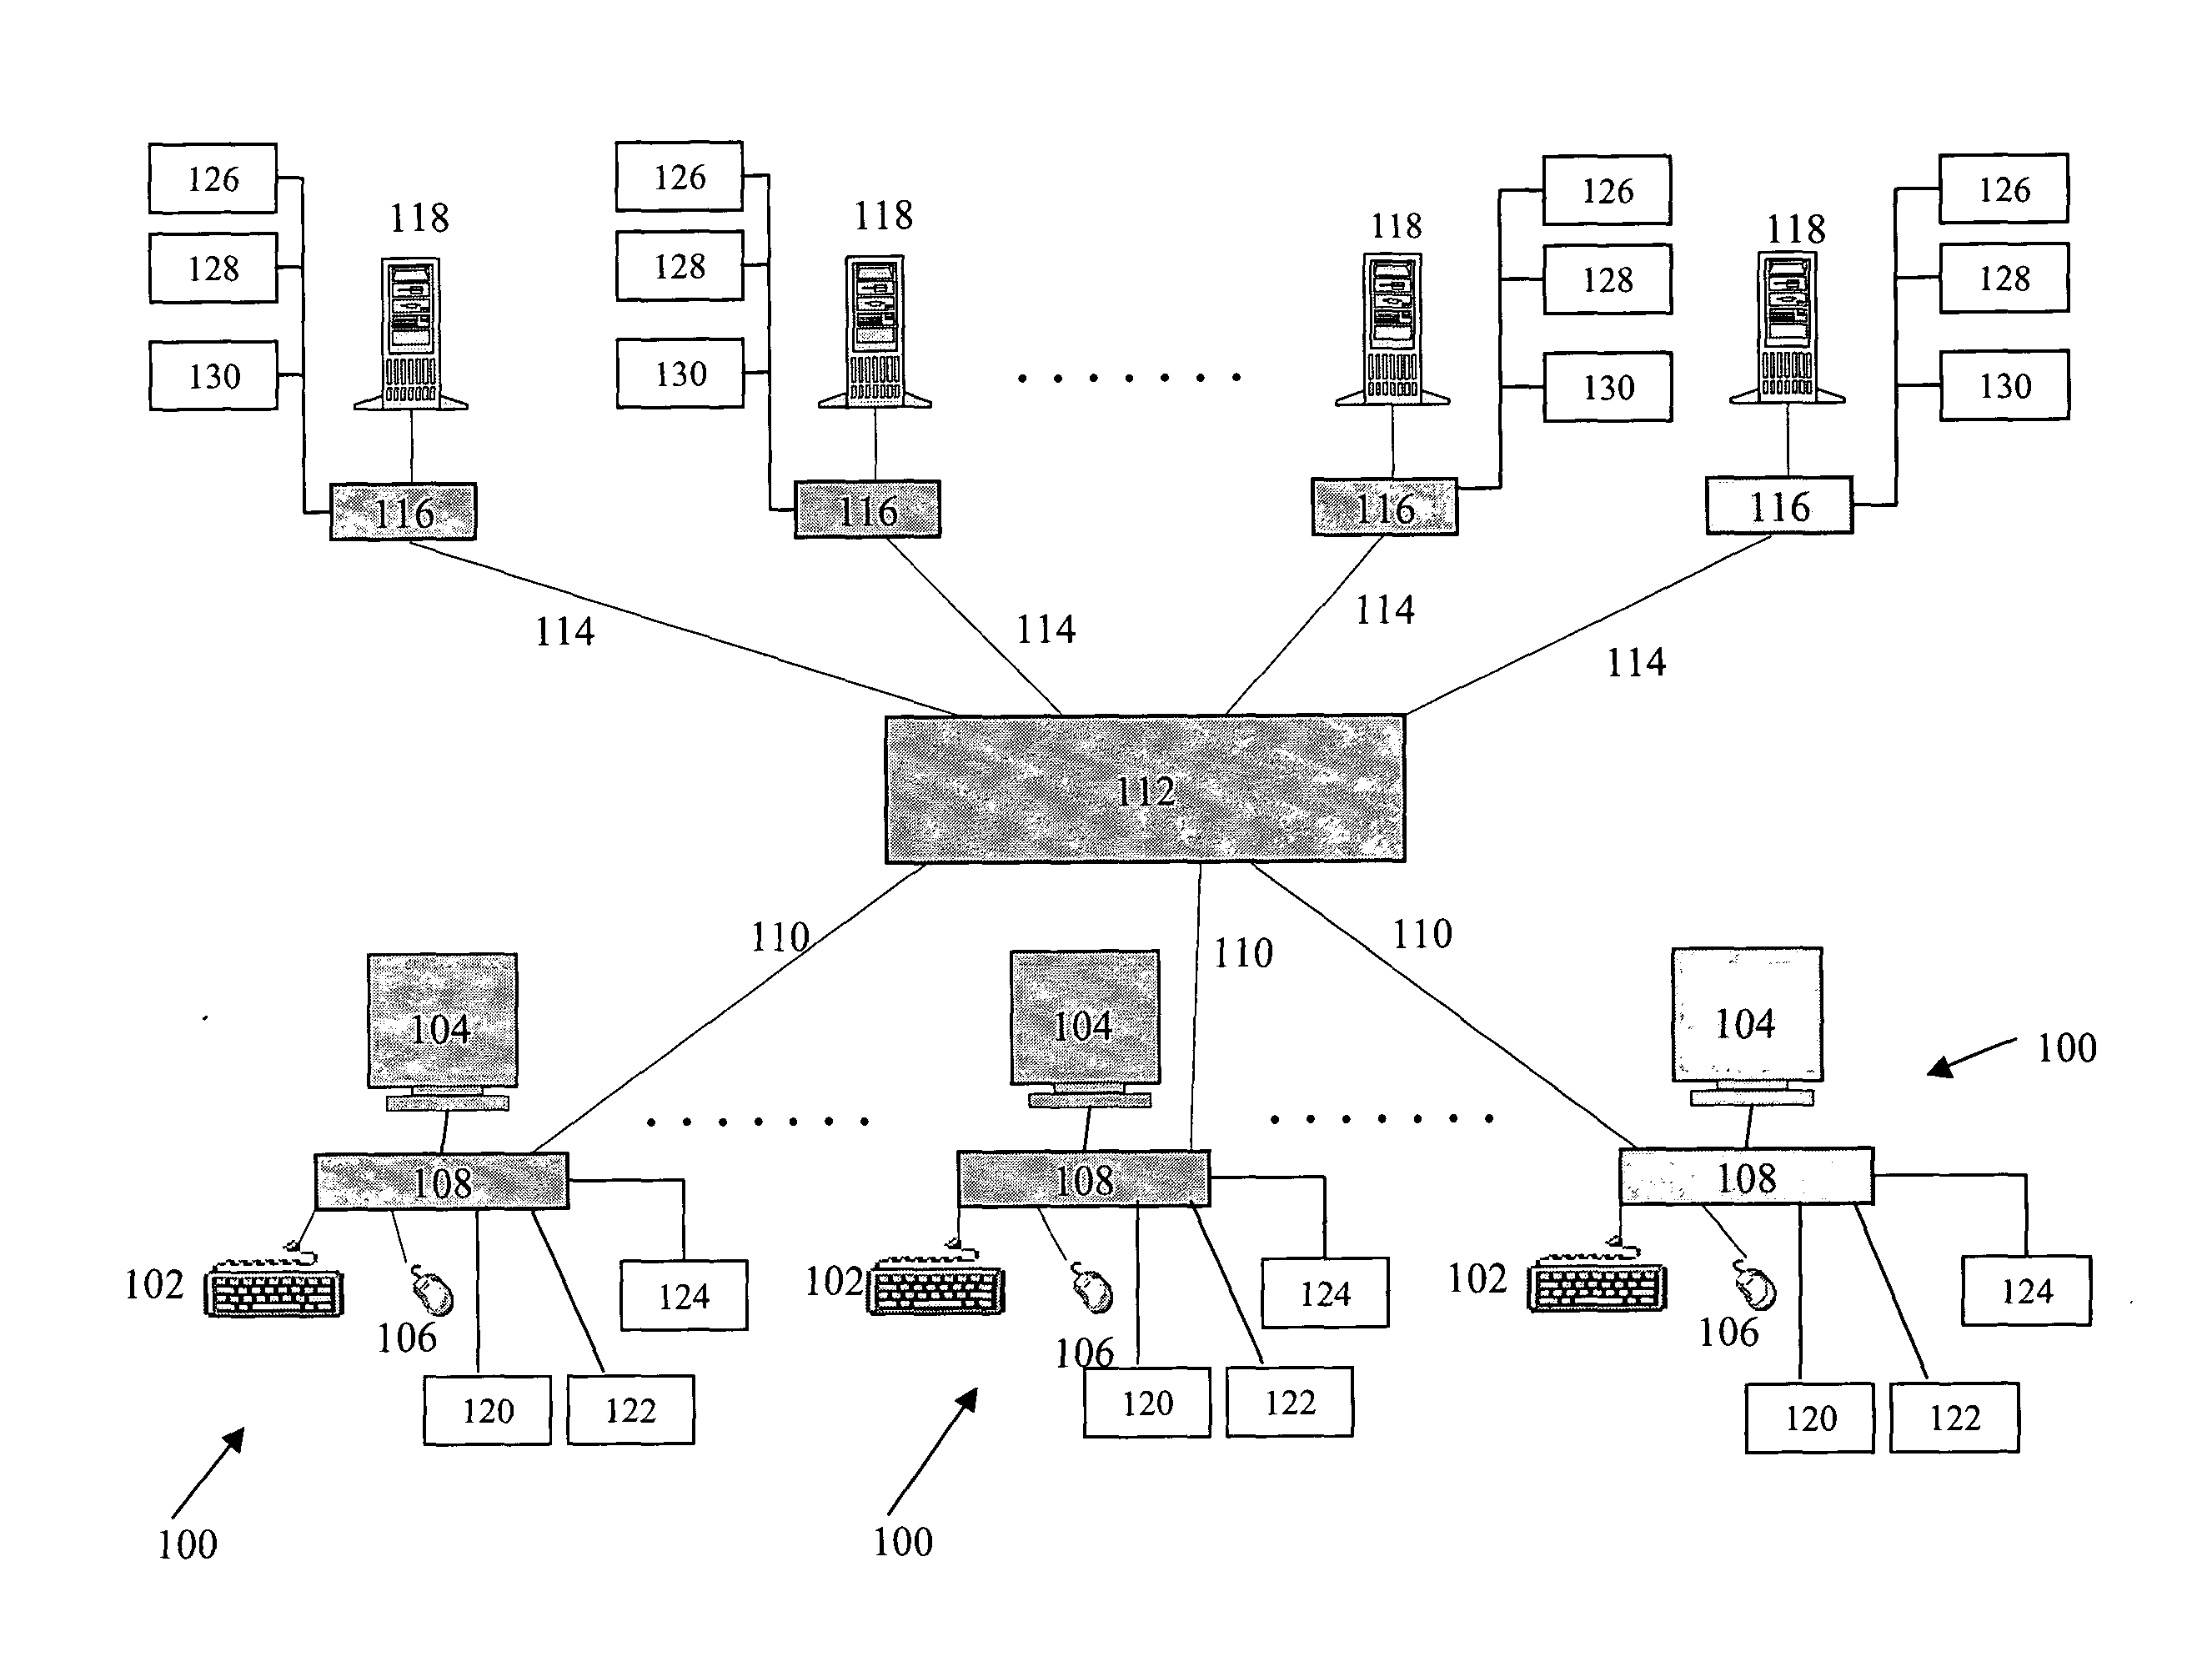 Multimedia-capable computer management system for selectively operating a plurality of computers